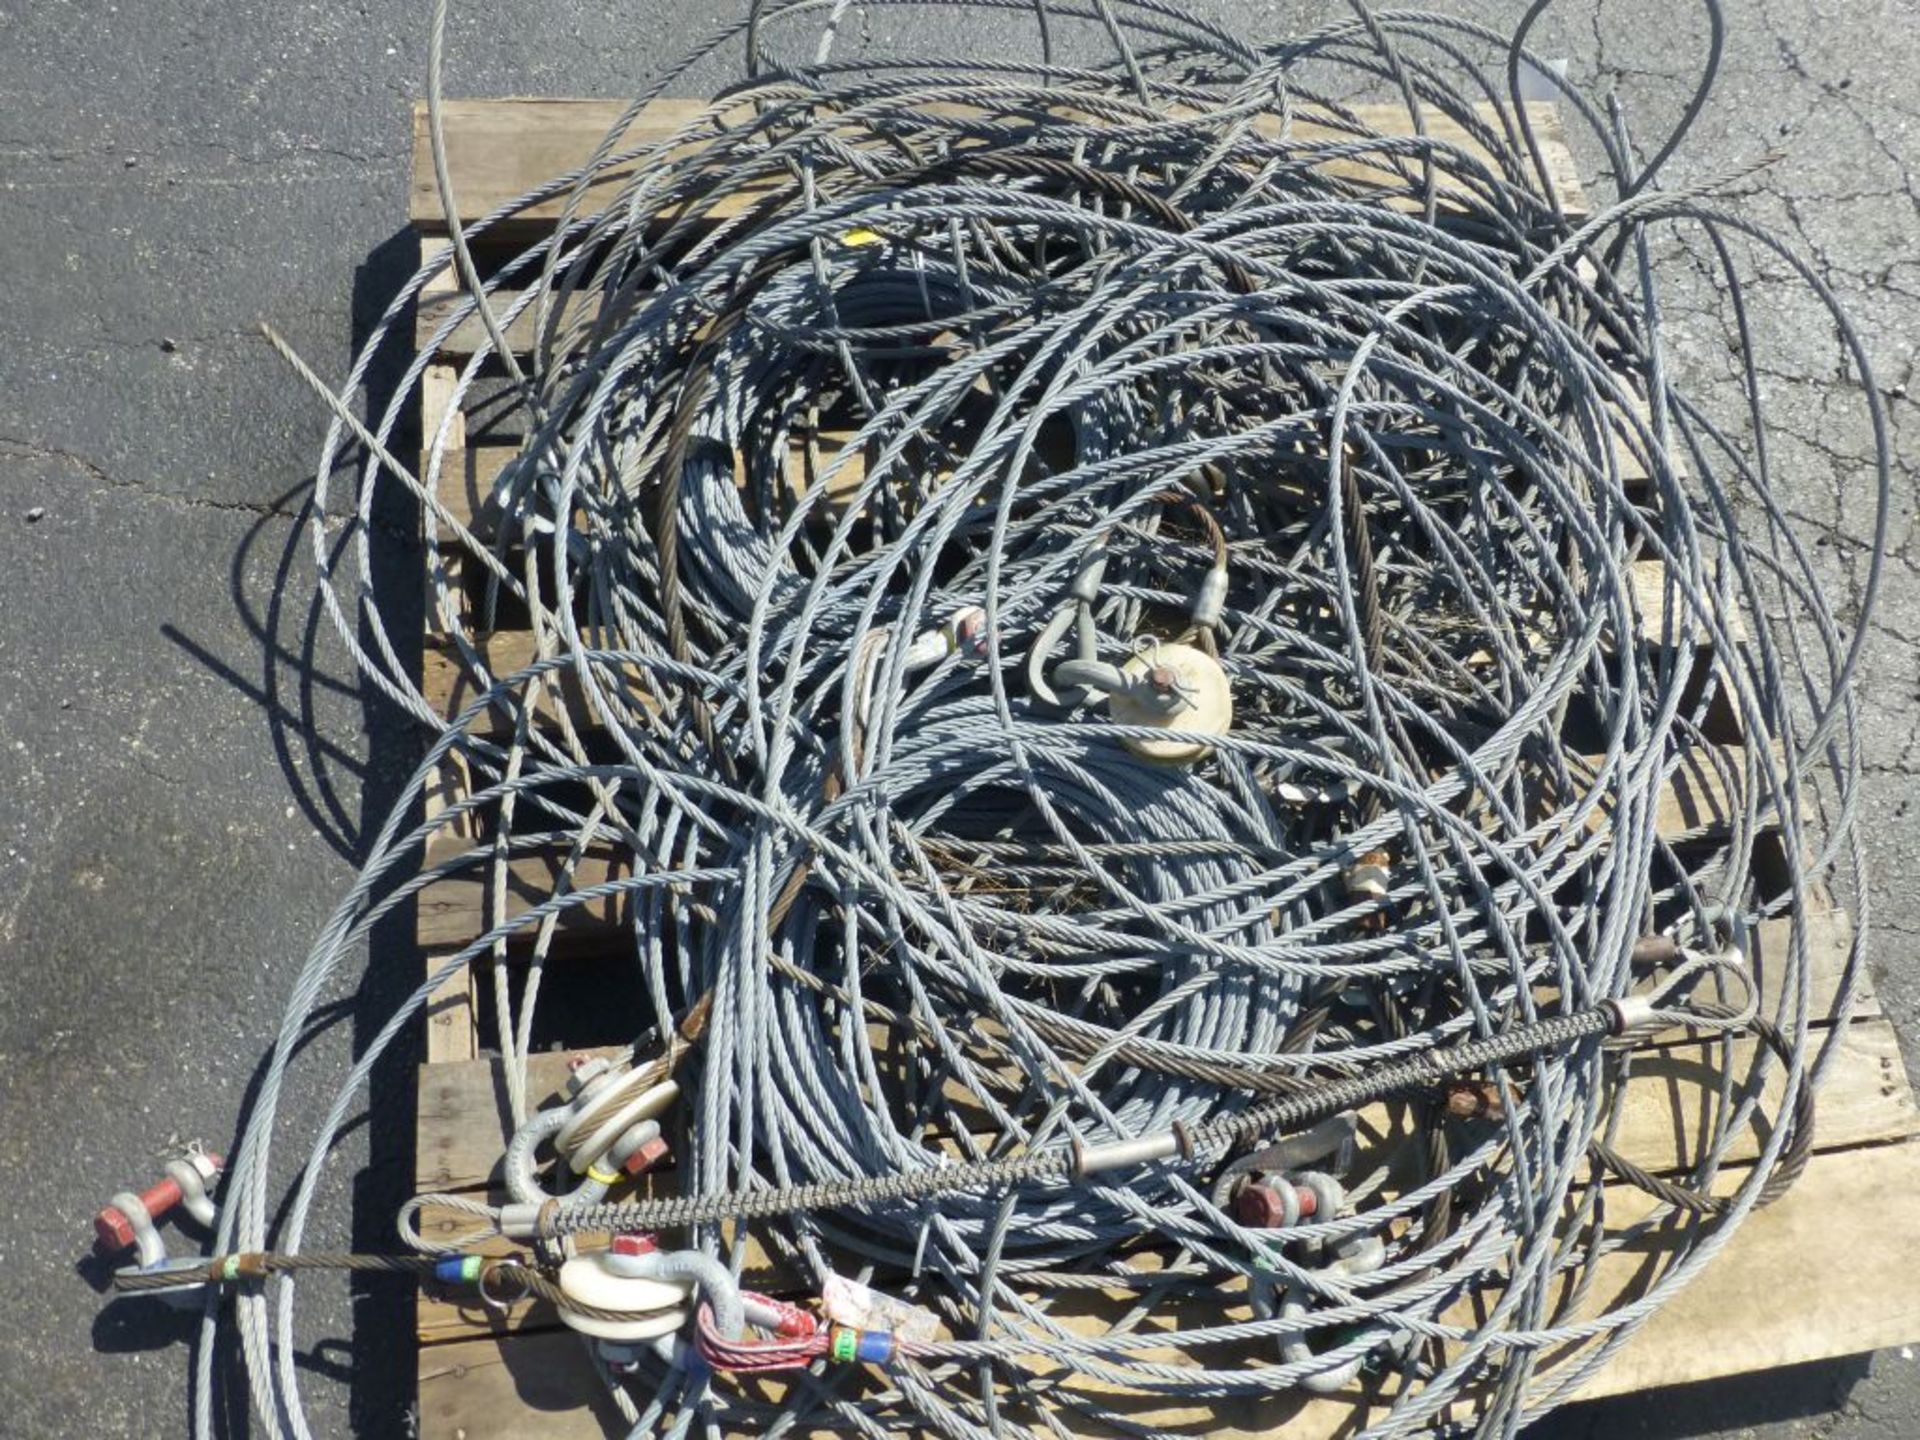 Lot of Assorted Hoist Cables - Image 4 of 8